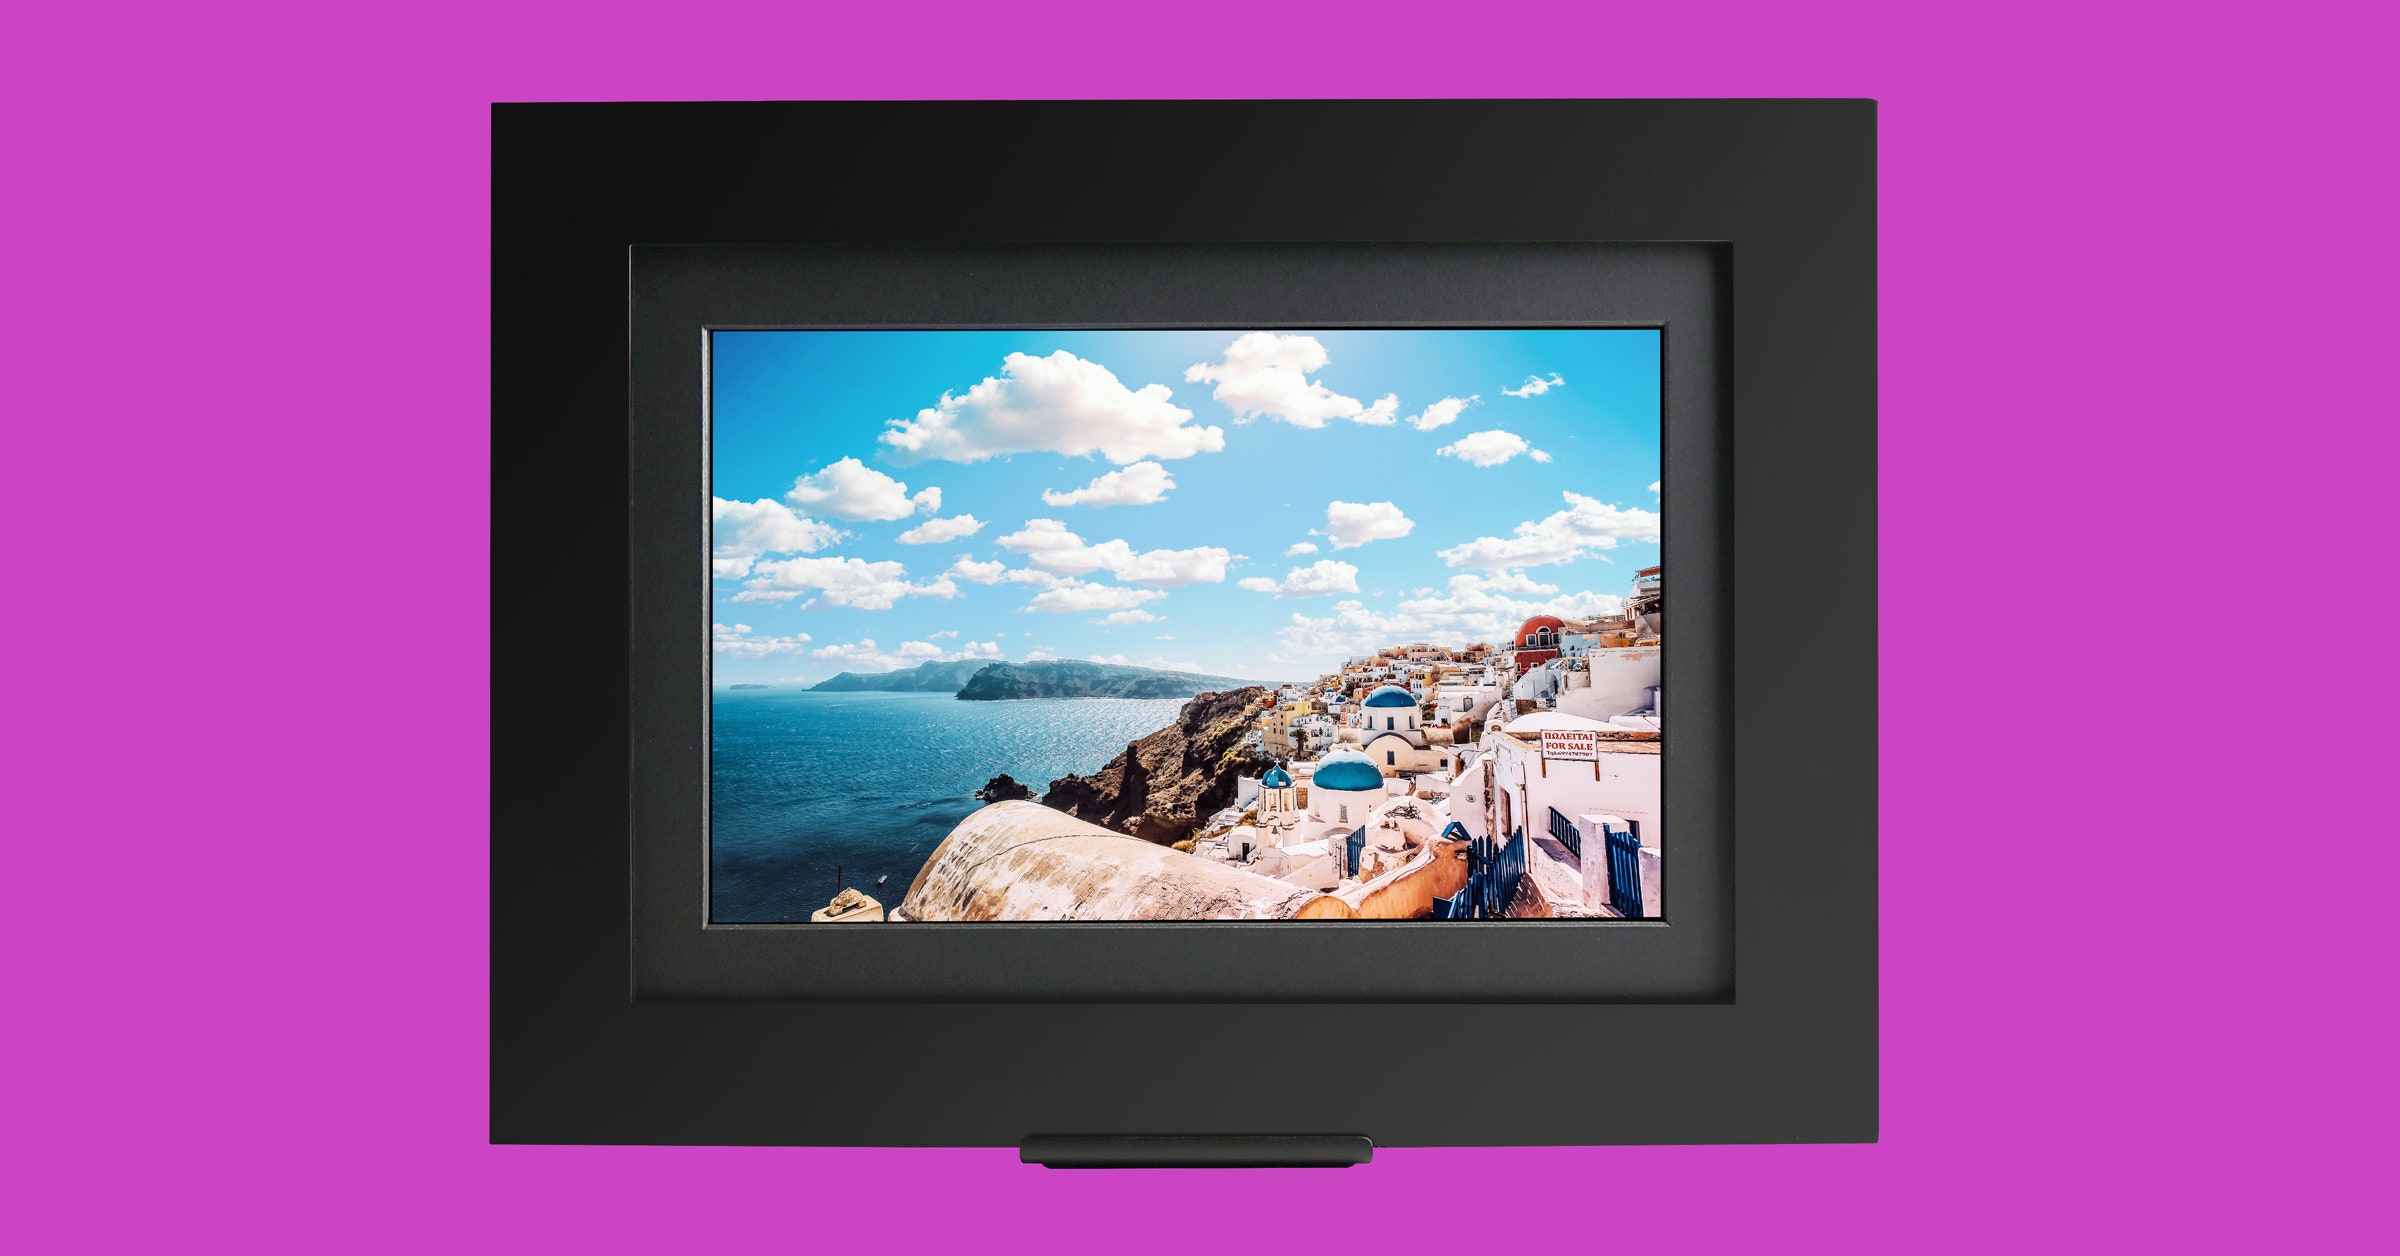 4 Best Digital Picture Frames for Sharing Photos (2022)